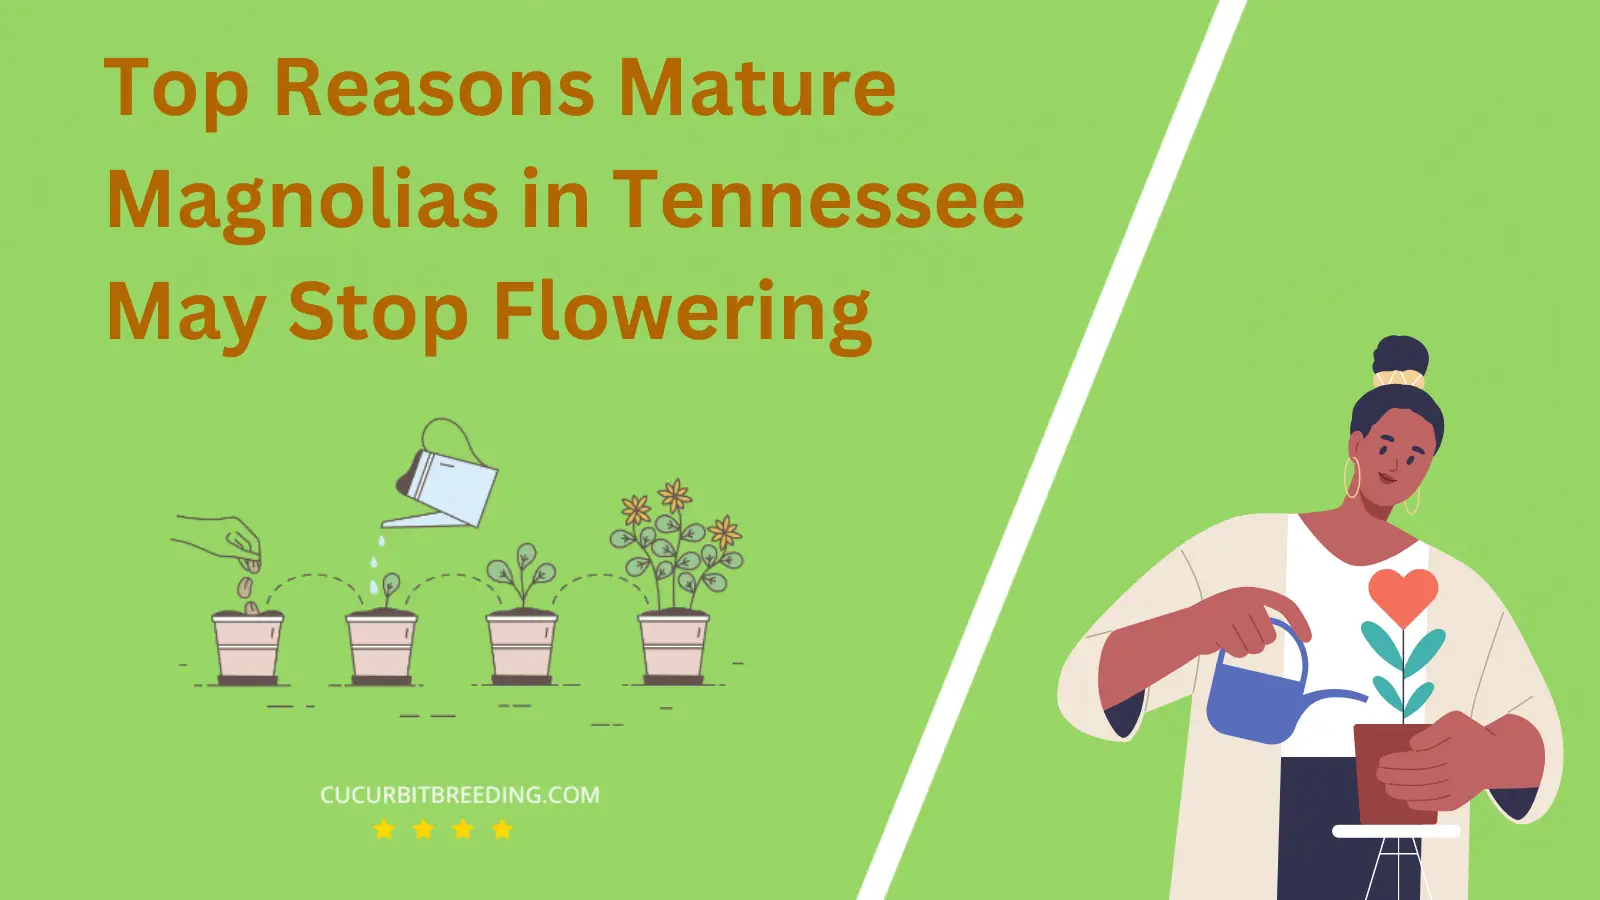 Top Reasons Mature Magnolias in Tennessee May Stop Flowering